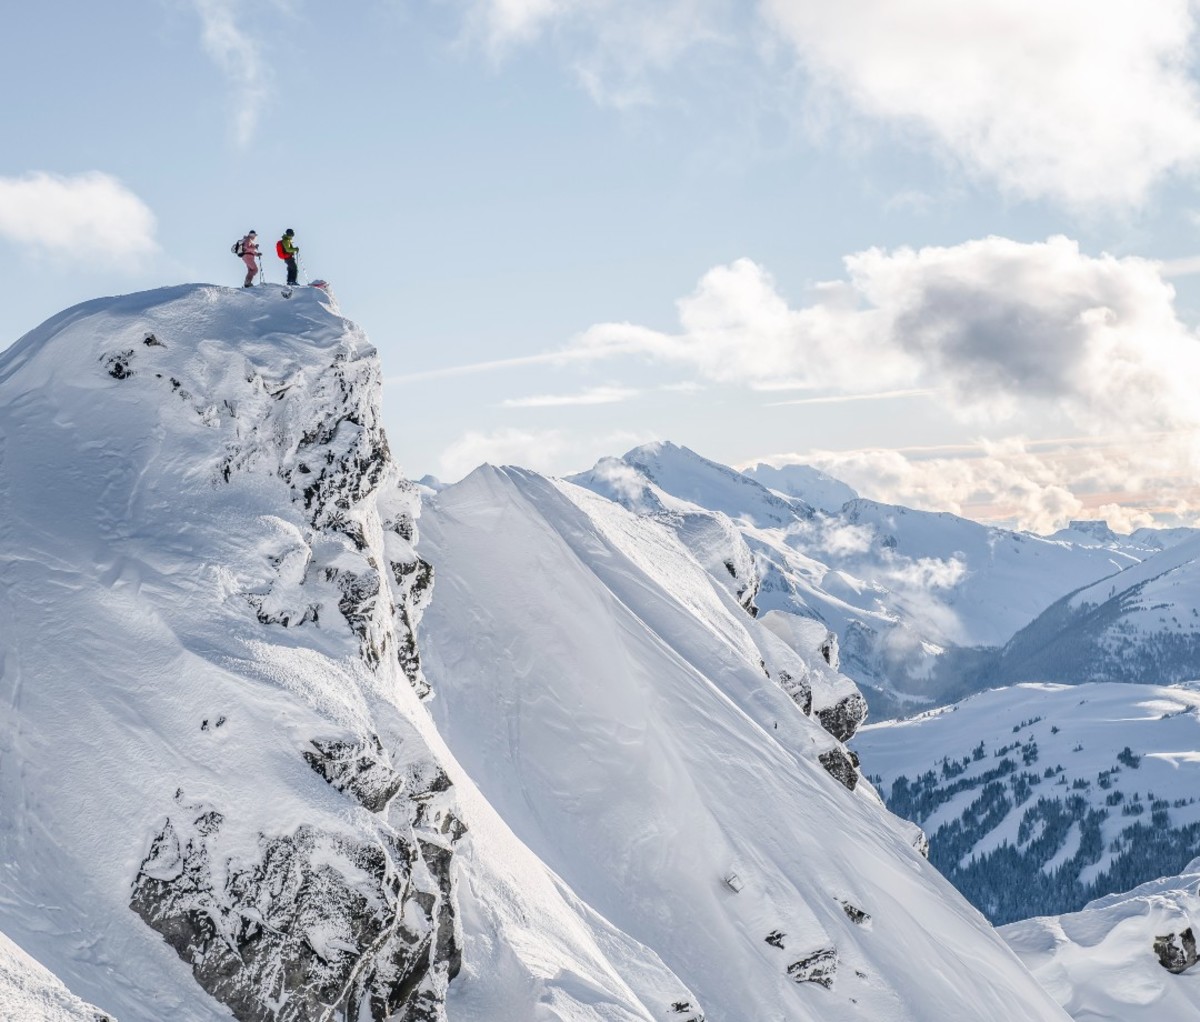 Two skiers standing on top of ski dropoff